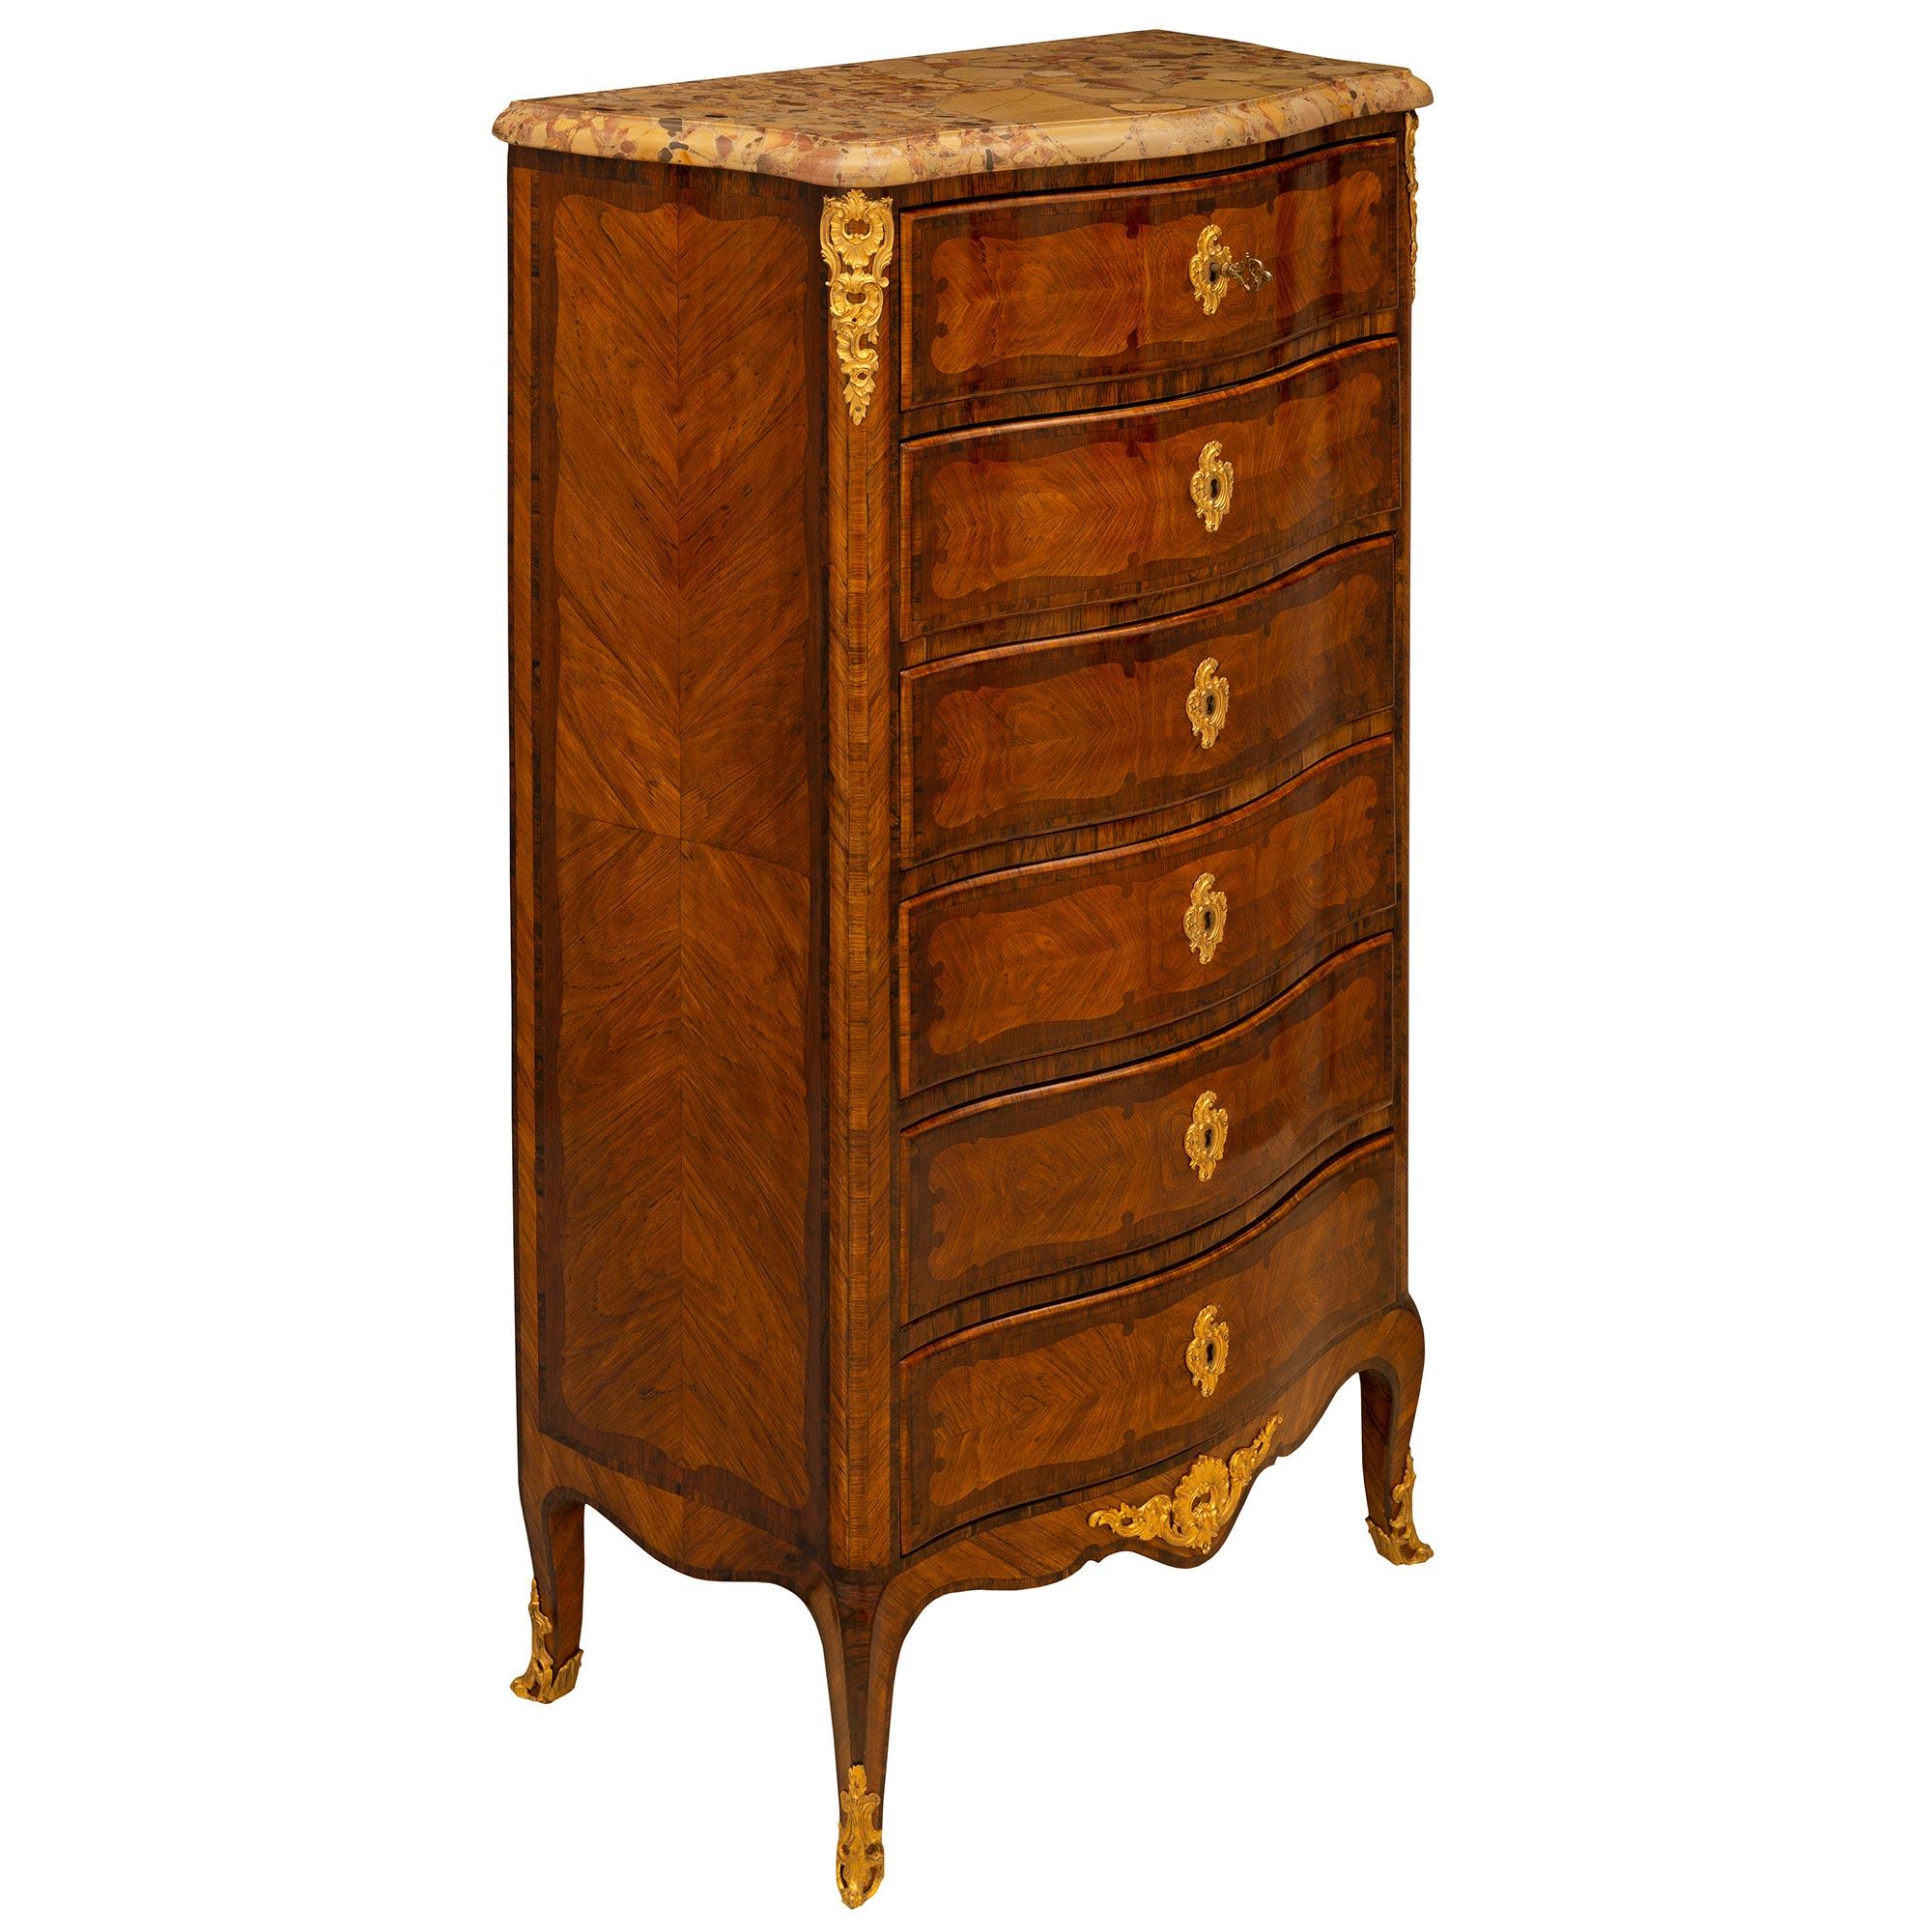 French 19th Century Transitional Style Kingwood and Ormolu Six Drawer Chiffonier In Good Condition For Sale In West Palm Beach, FL